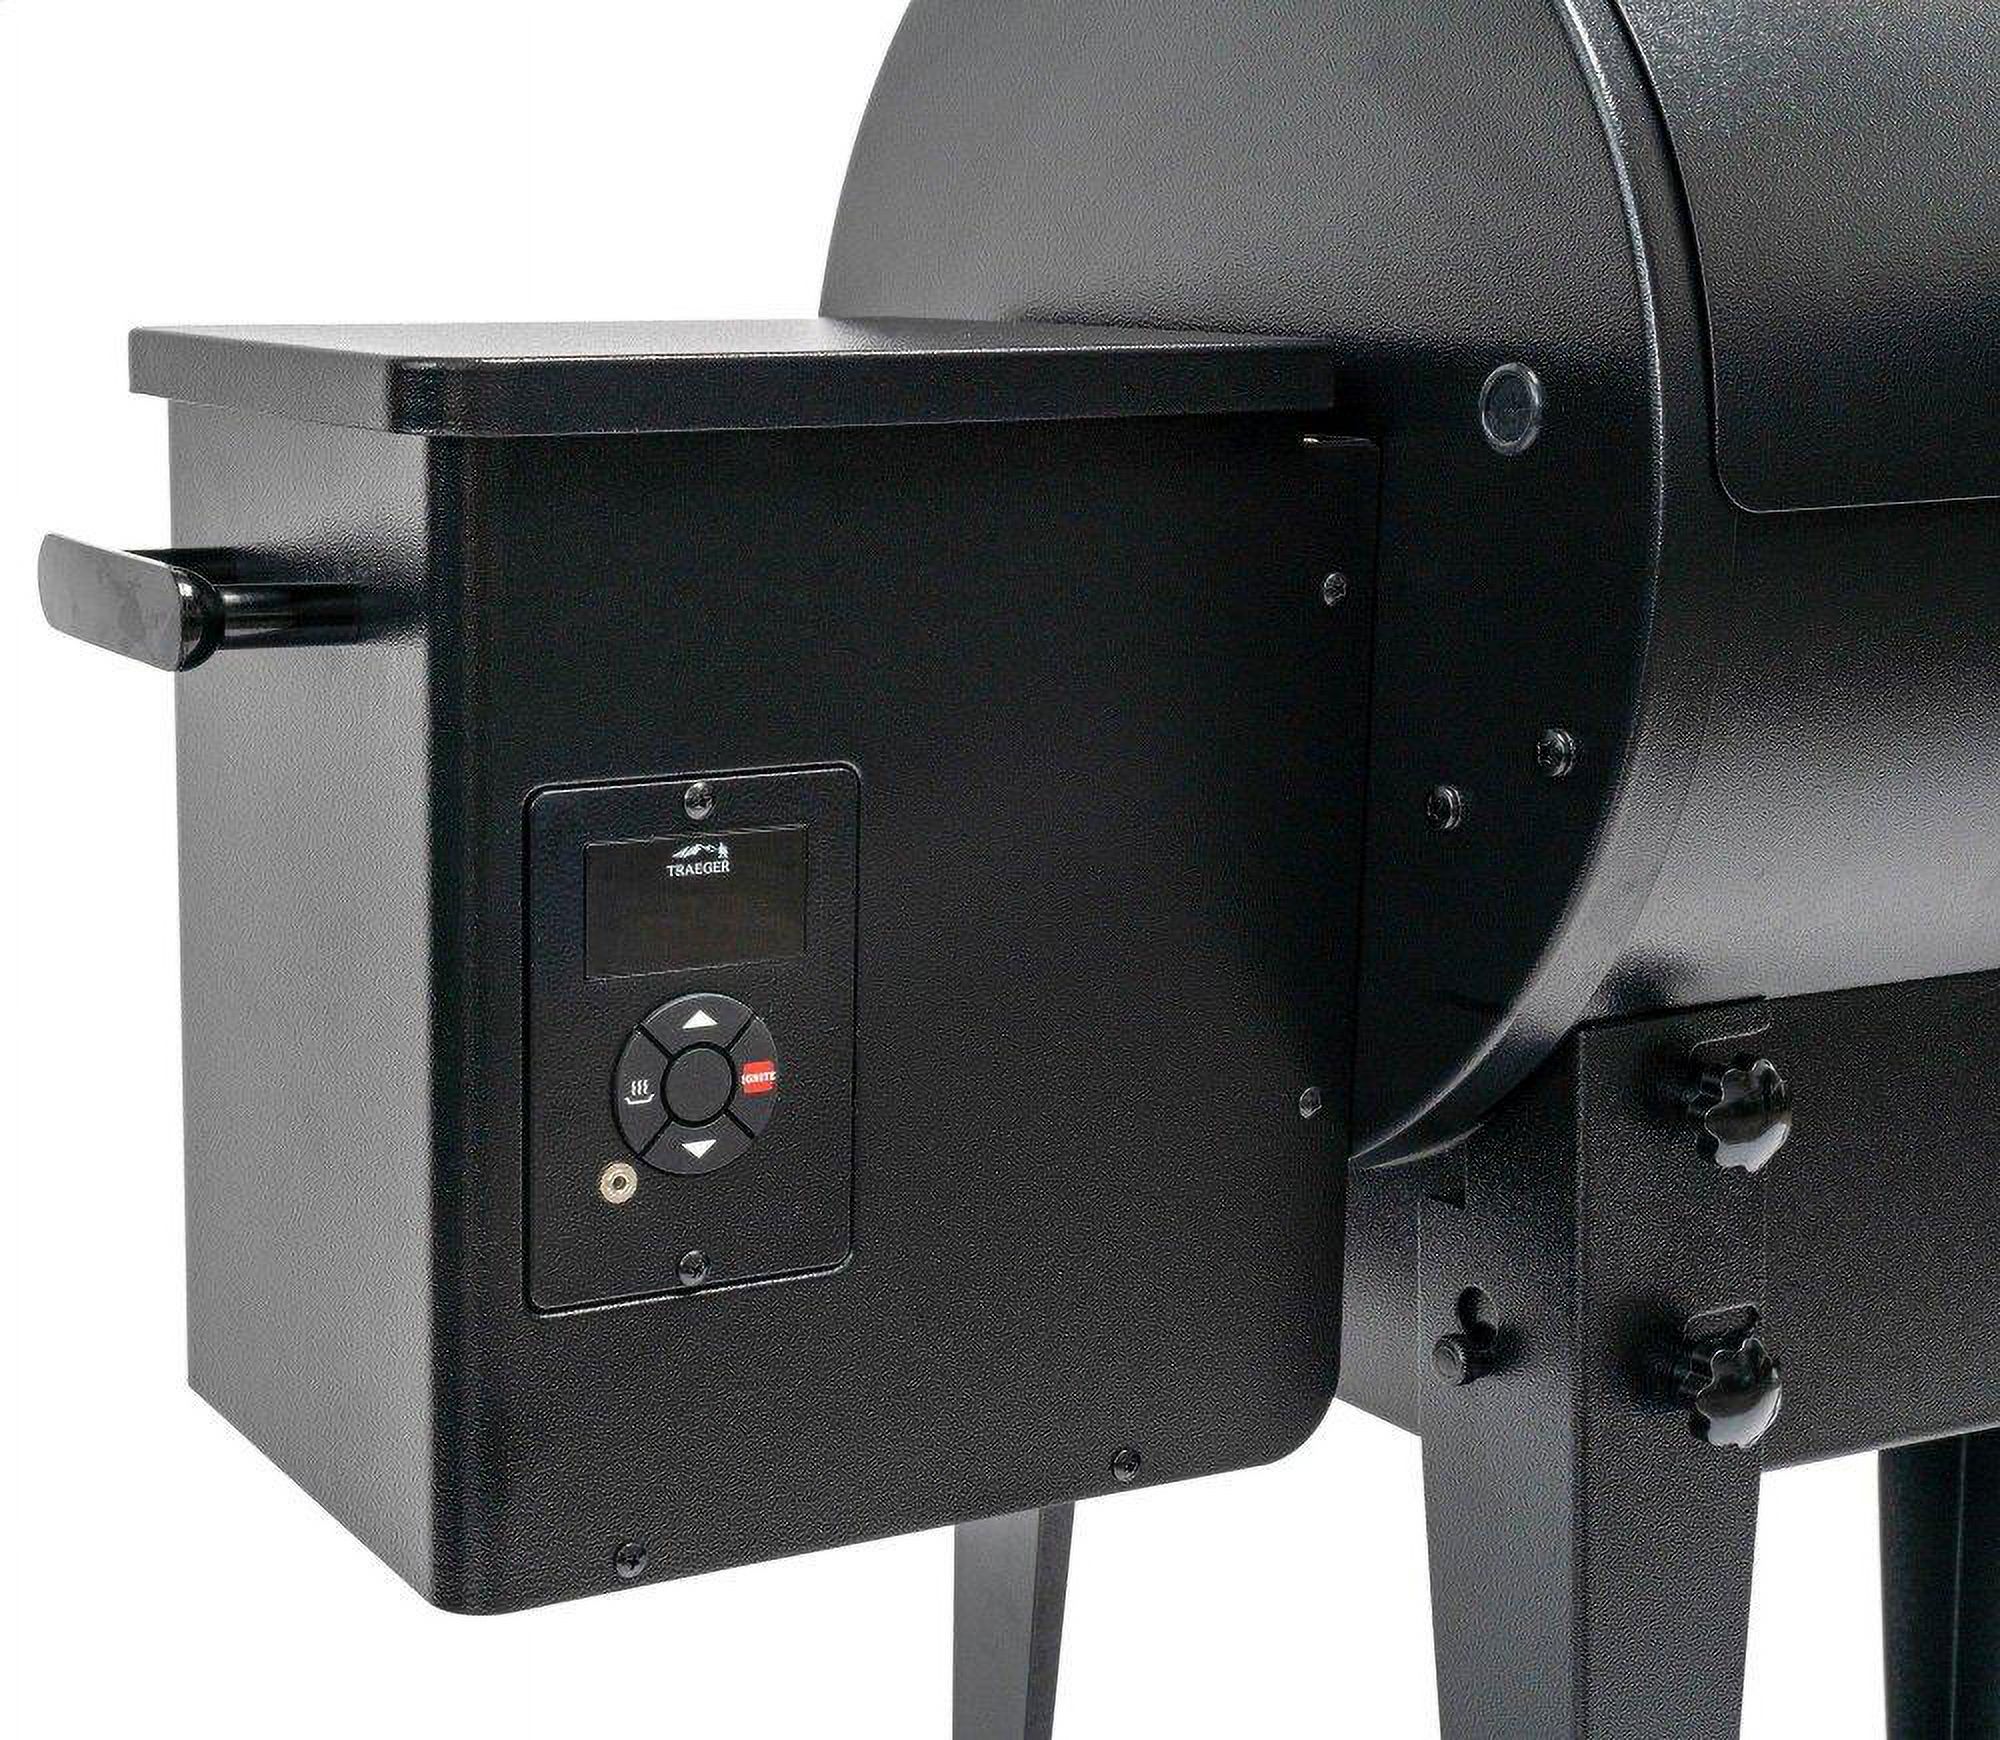 Traeger Pellet Grills Tailgater 20 Wood Pellet Grill and Smoker - Black - image 4 of 5